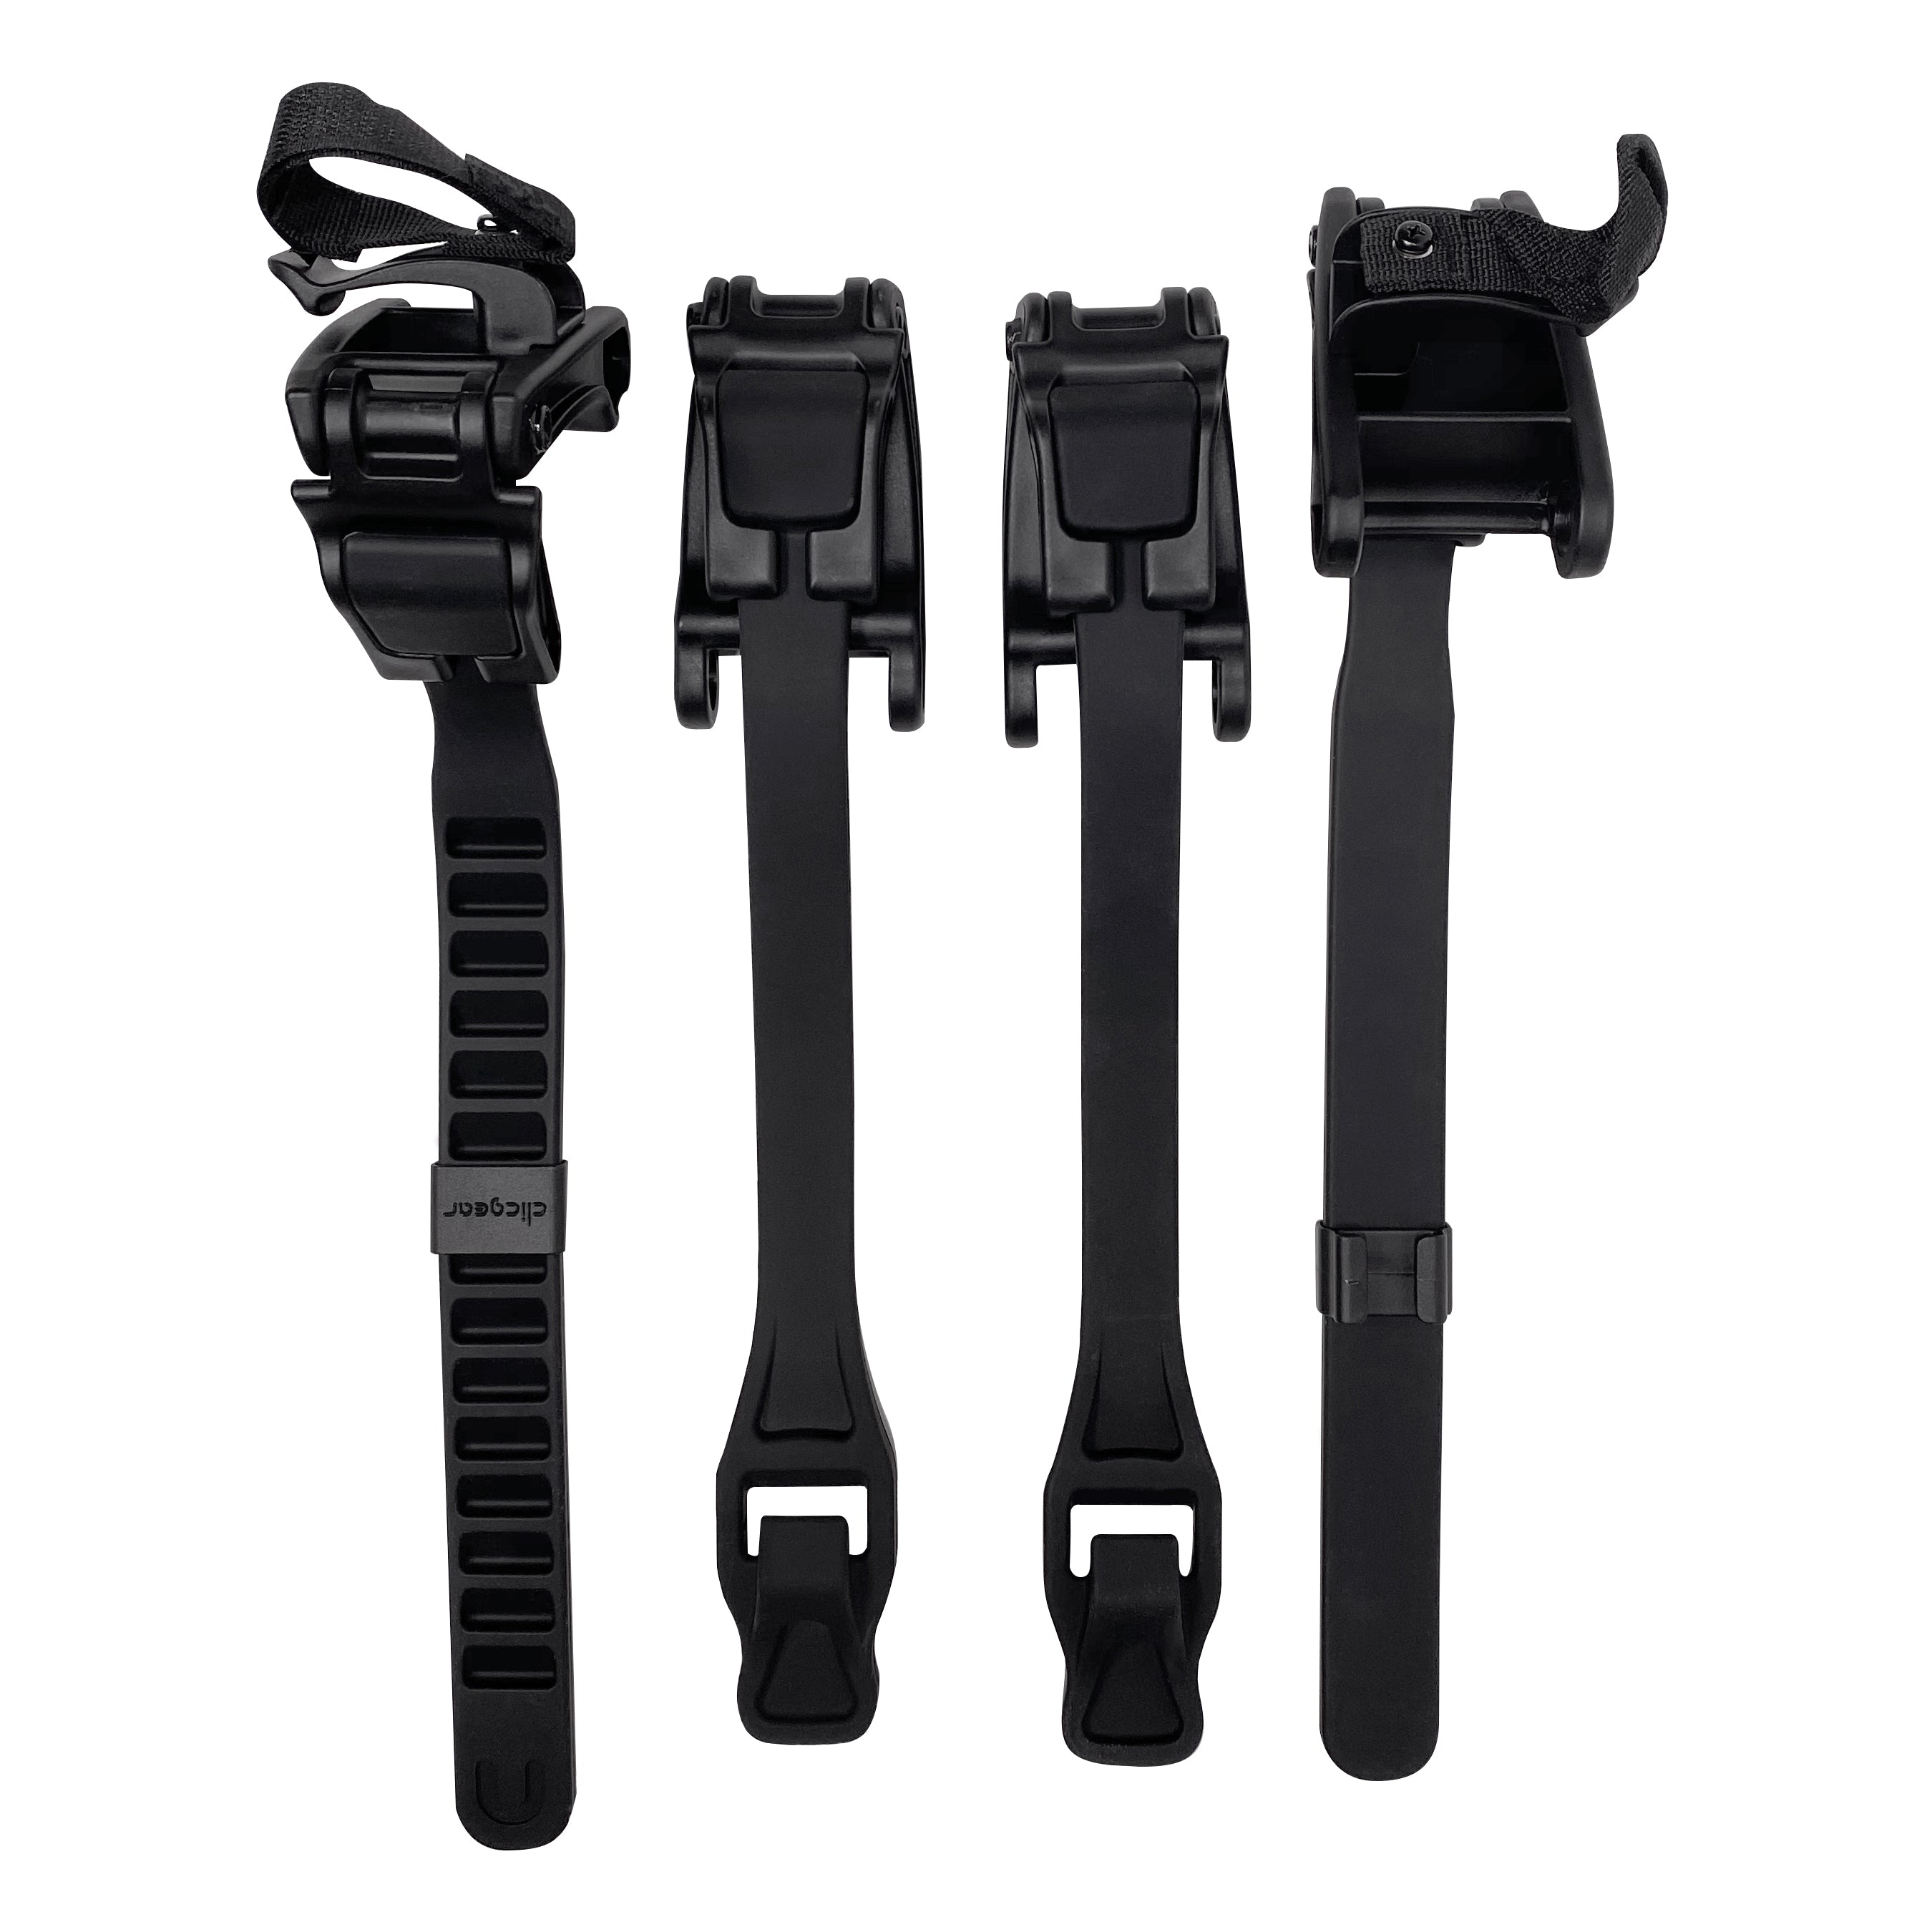 Clicgear Silicone Bag Strap Upgrade Kit for Models 1.0 - 3.5+– CLICGEAR